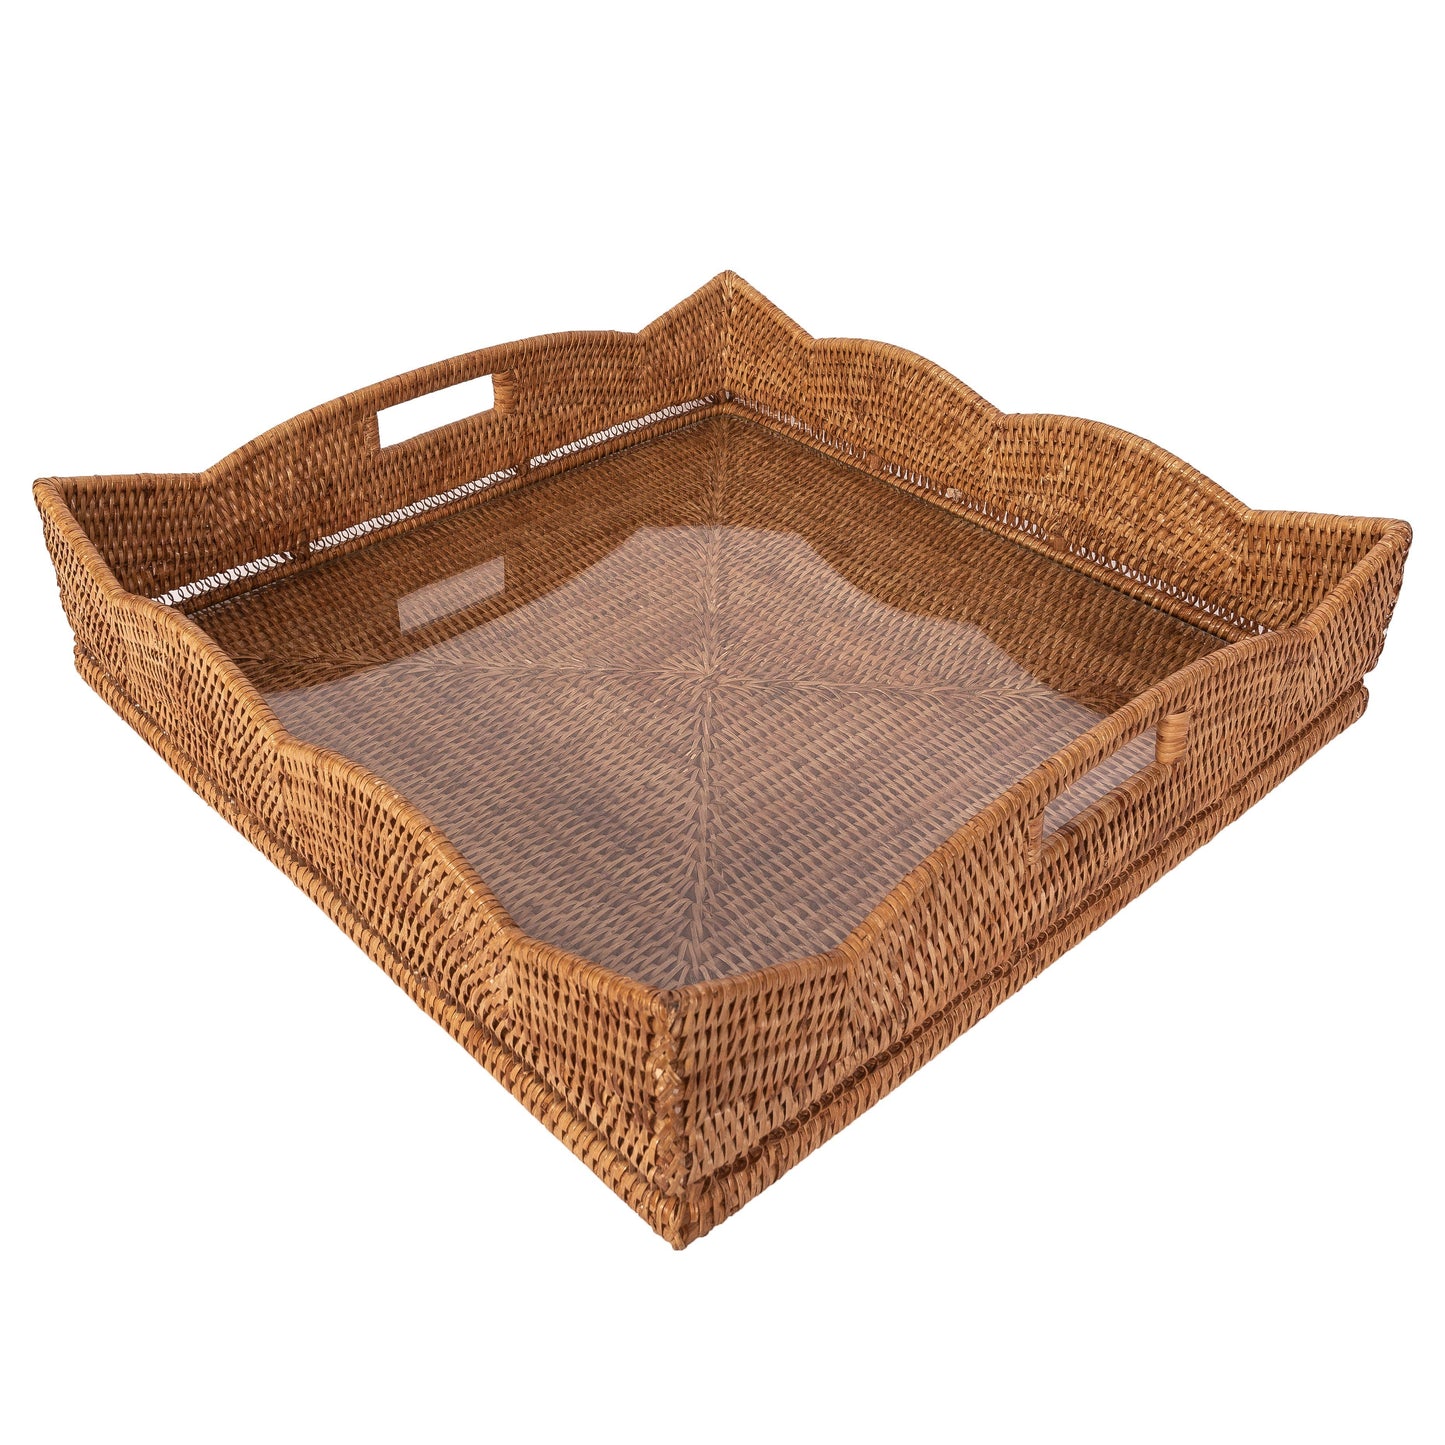 Artifacts Rattan Scallop Square Tray with Glass Insert: 20"x20" / White Wash